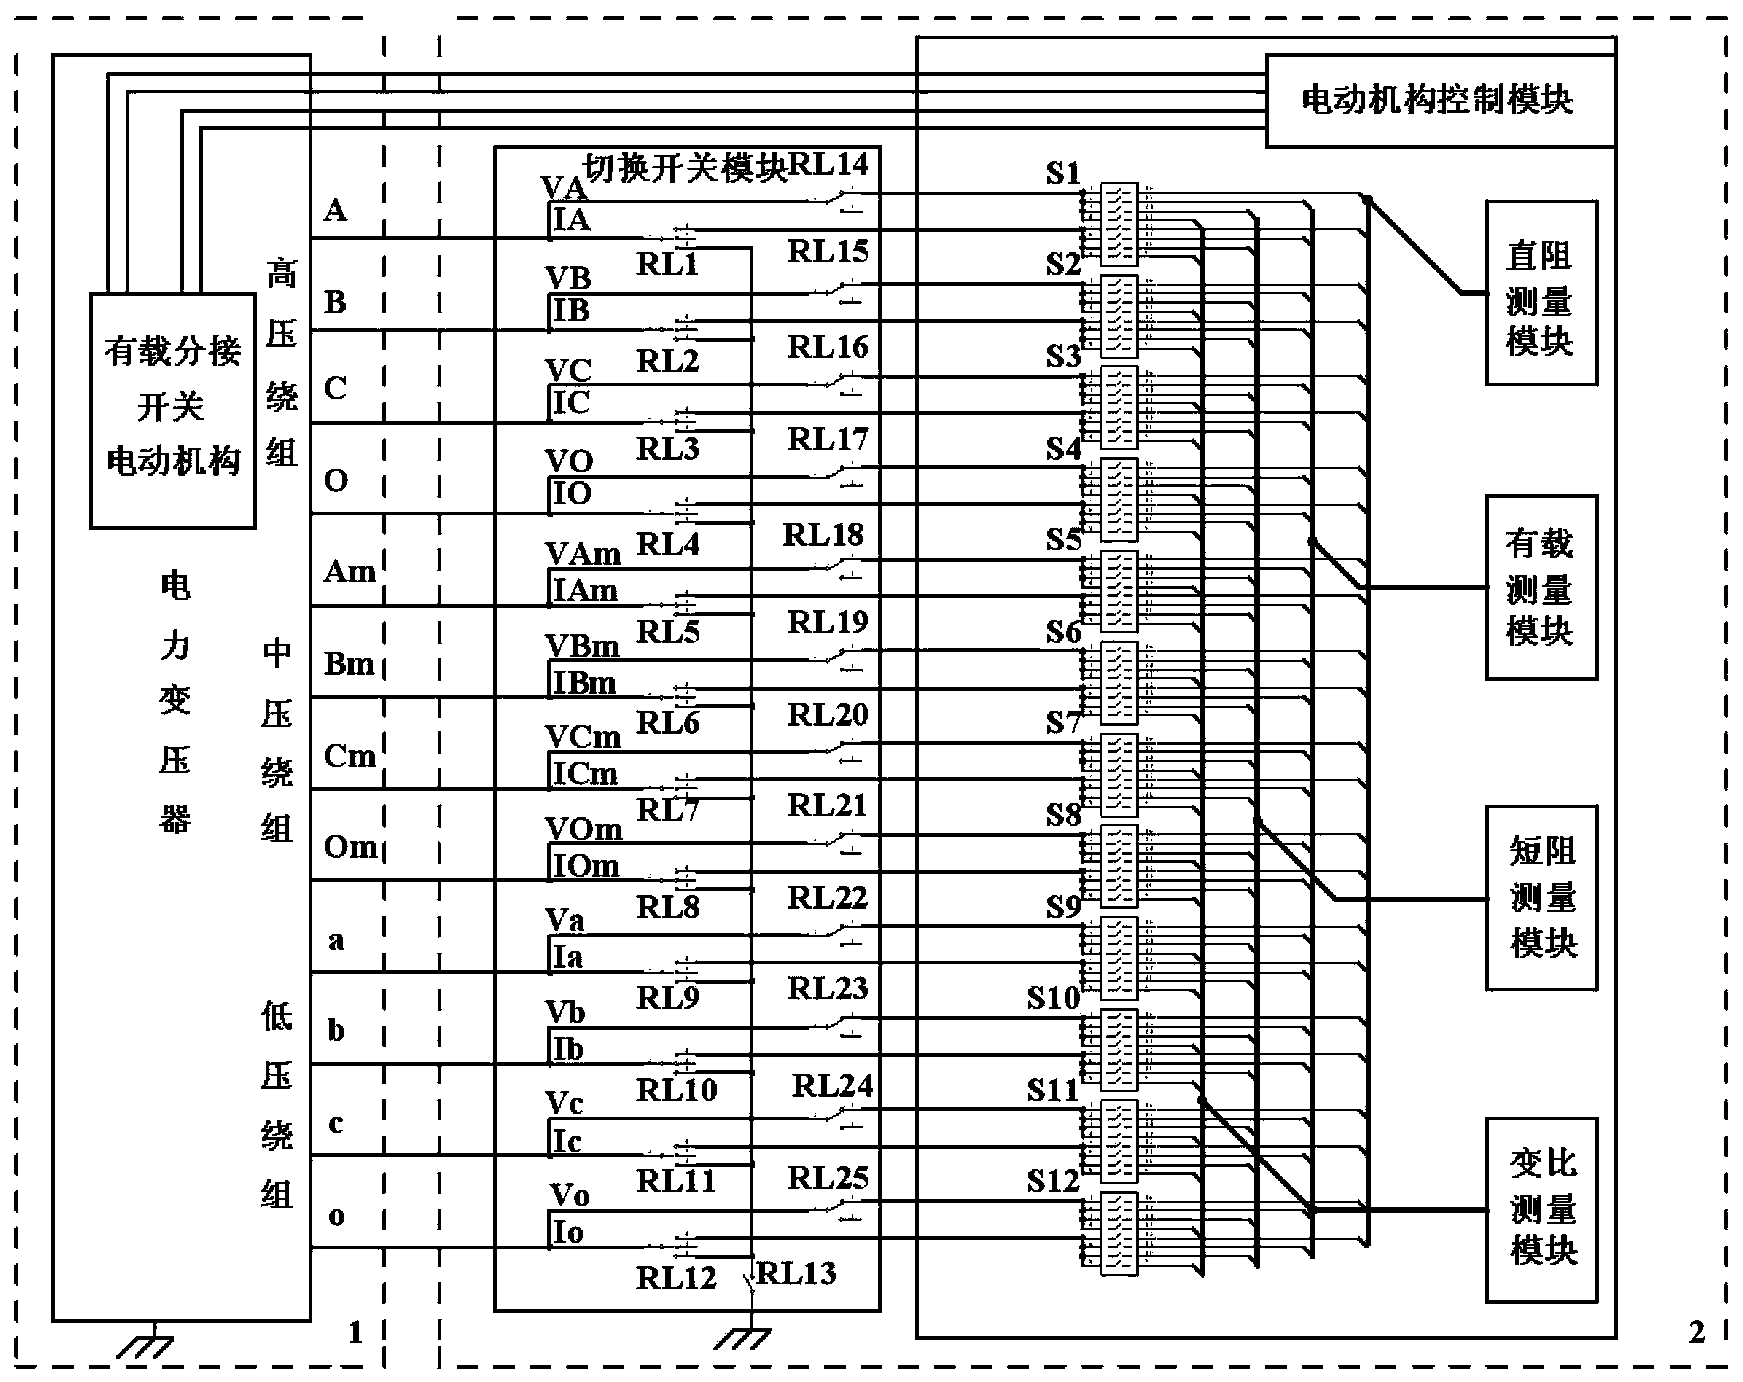 Method for automatically measuring direct-current resistor, short-circuit impedance, on-load switch and non-load voltage ratio of transformer